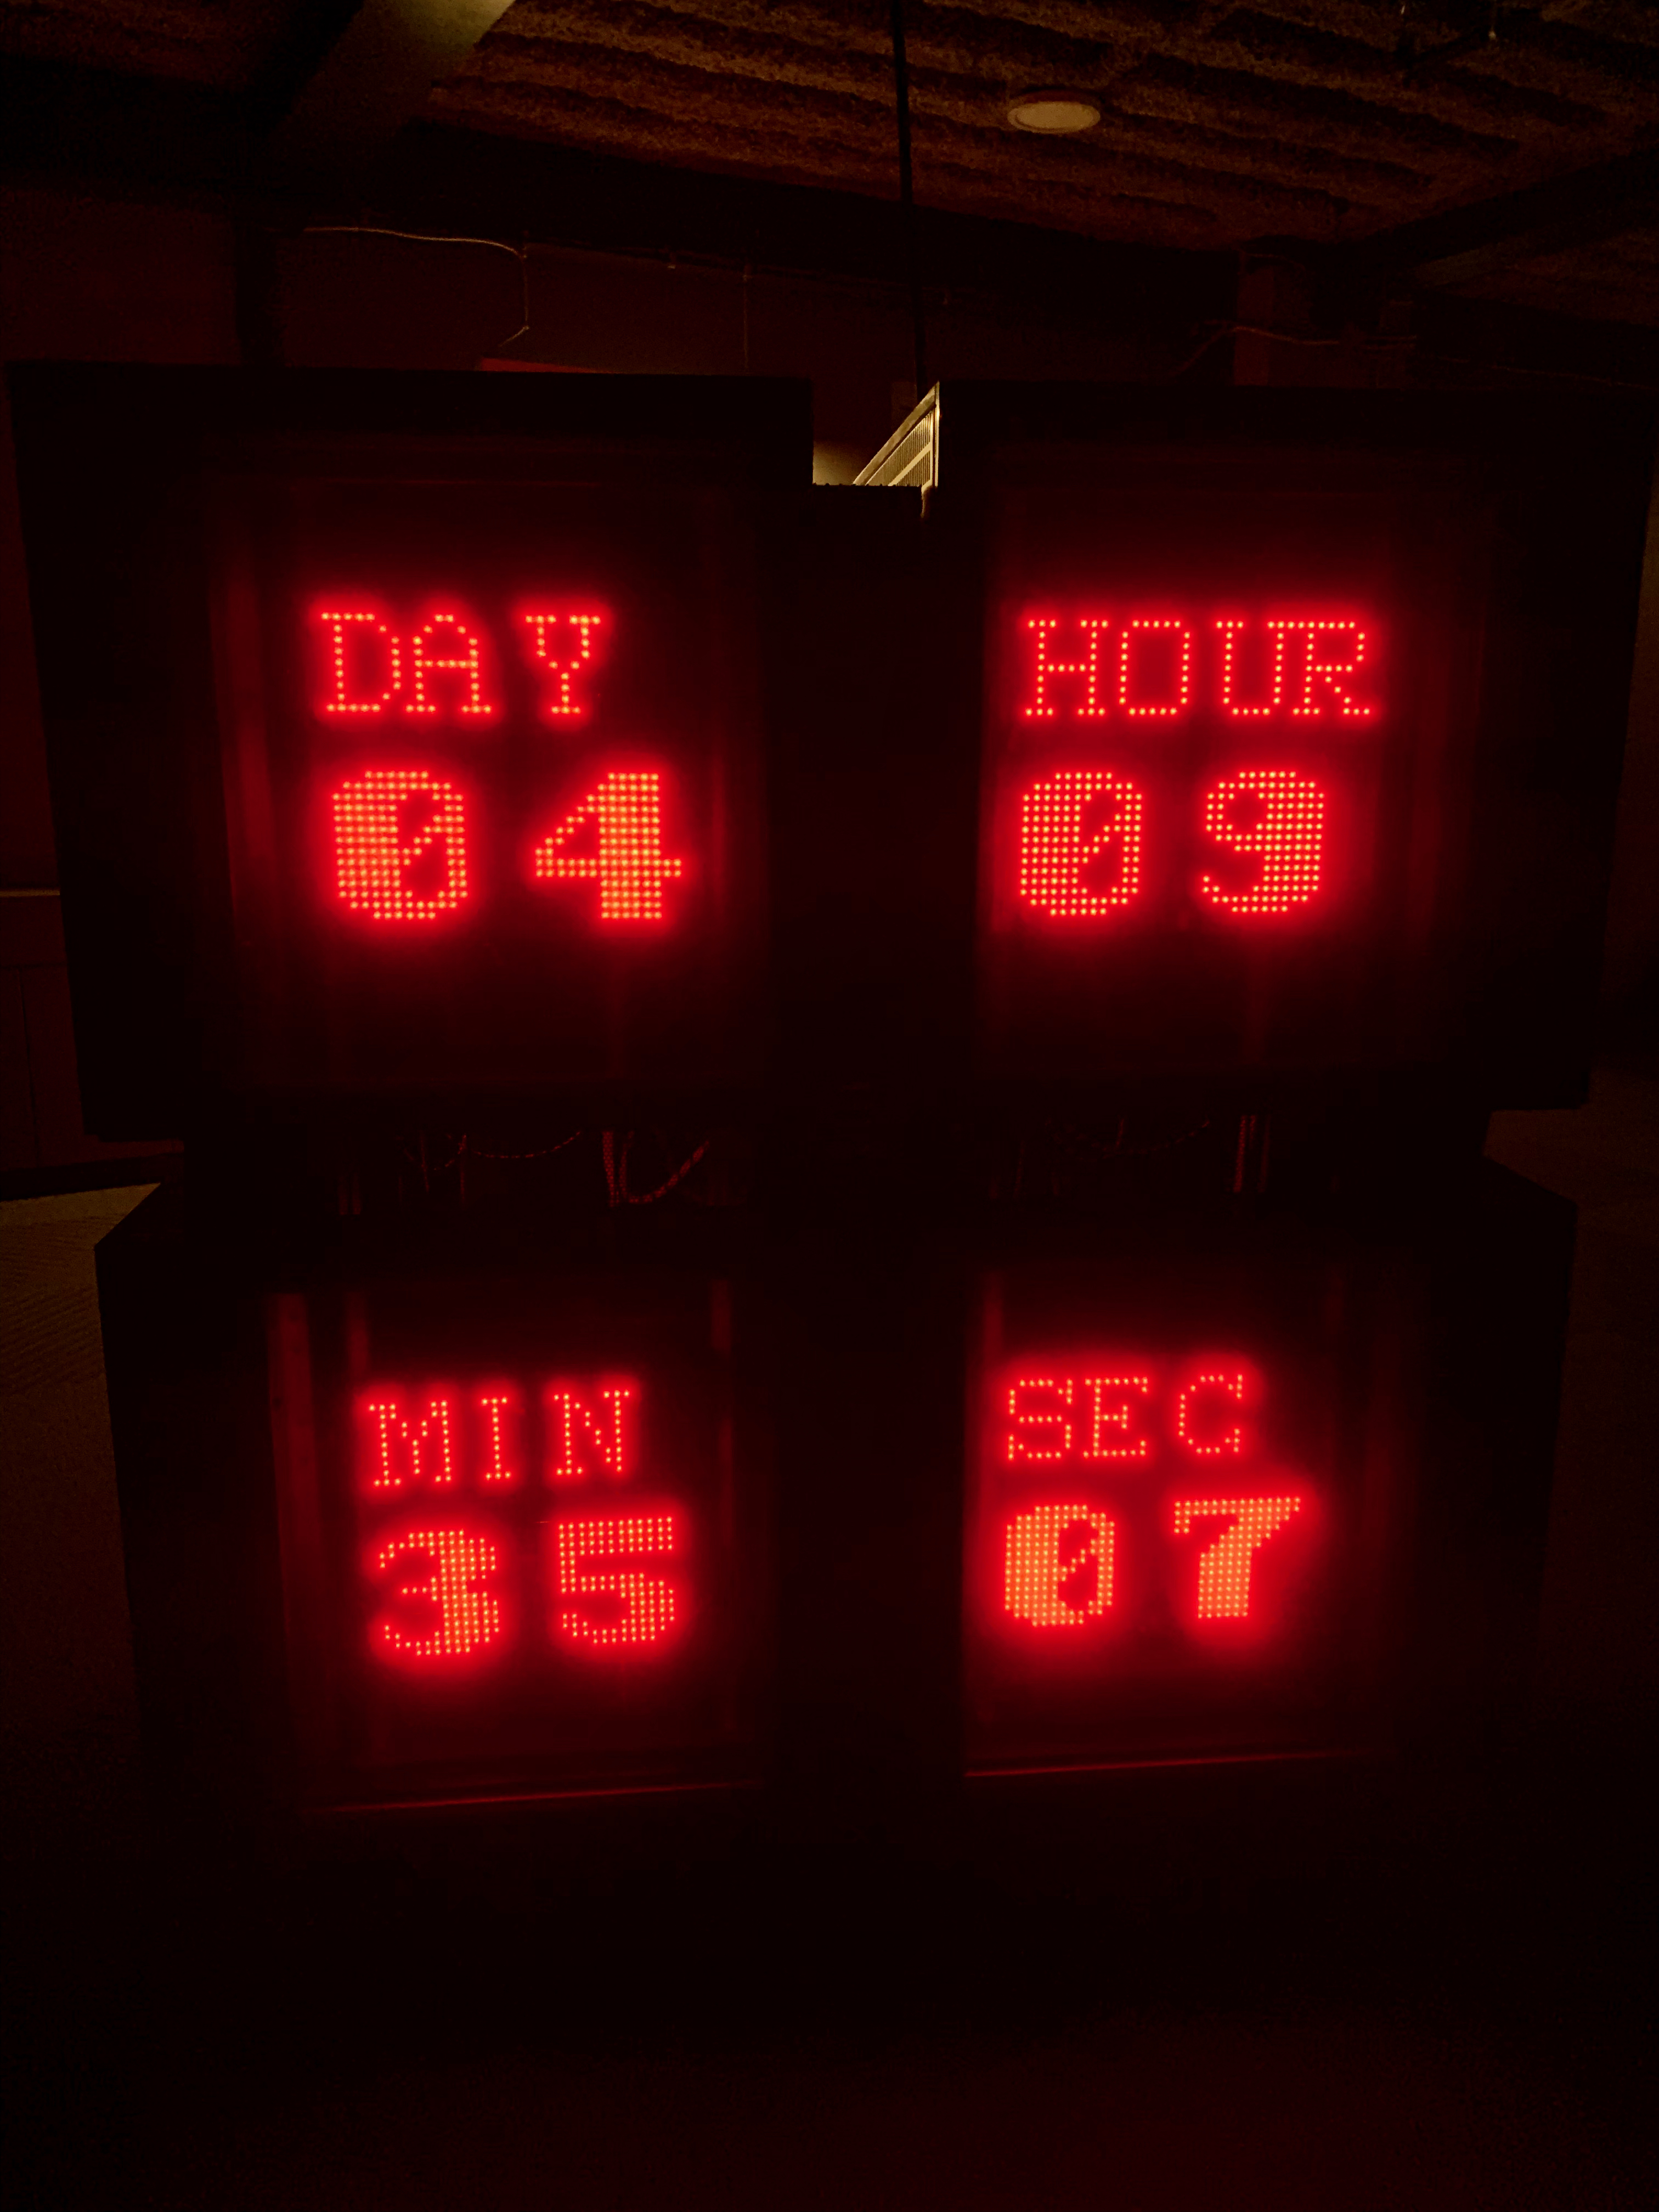 The husk of a <a href="https://en.wikipedia.org/wiki/Thinking_Machines_Corporation">Thinking Machines</a> model <a href="https://en.wikipedia.org/wiki/Connection_Machine">CM-2</a> is repurposed to create an ominous 2020 countdown clock at Seattle&apos;s <a href="https://livingcomputers.org/">Living Computer Museum</a>.